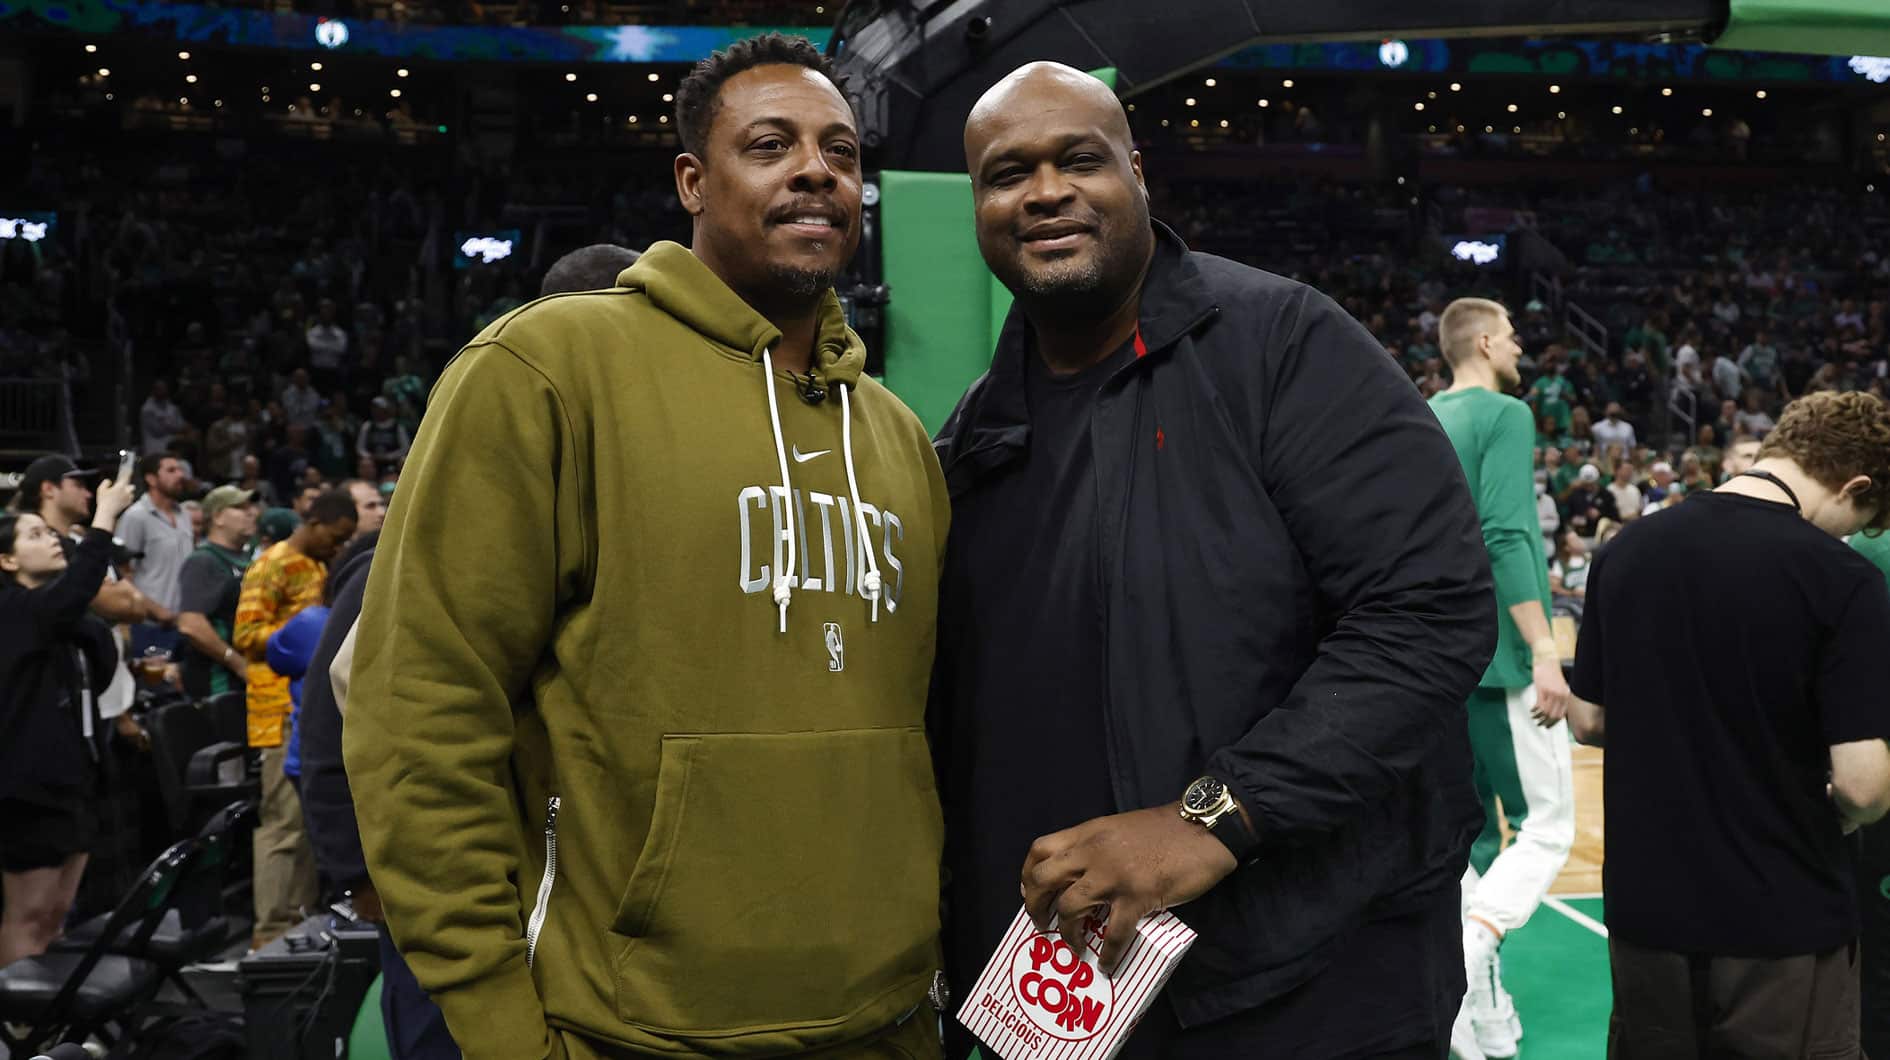 Former Boston Celtics great Paul Pierce (left) and Antoine Walker before the game between the Boston Celtics and the Miami Heat at TD Garden